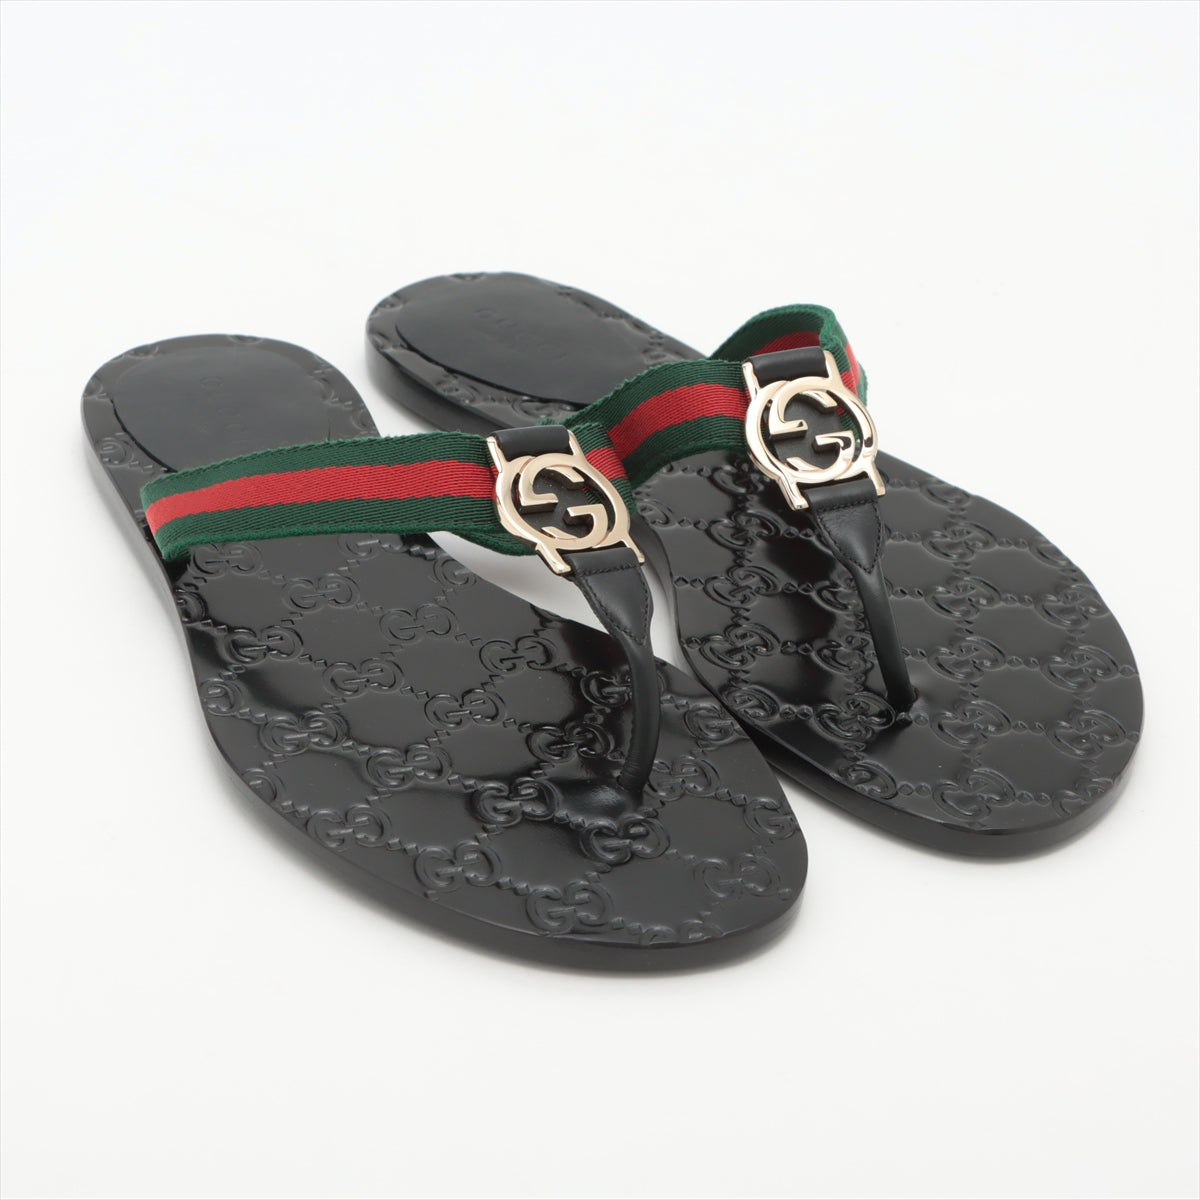 Gucci Interlocking G Canvas & leather Beach sandals 37 Ladies' Black GG Sherry Line box There is a bag